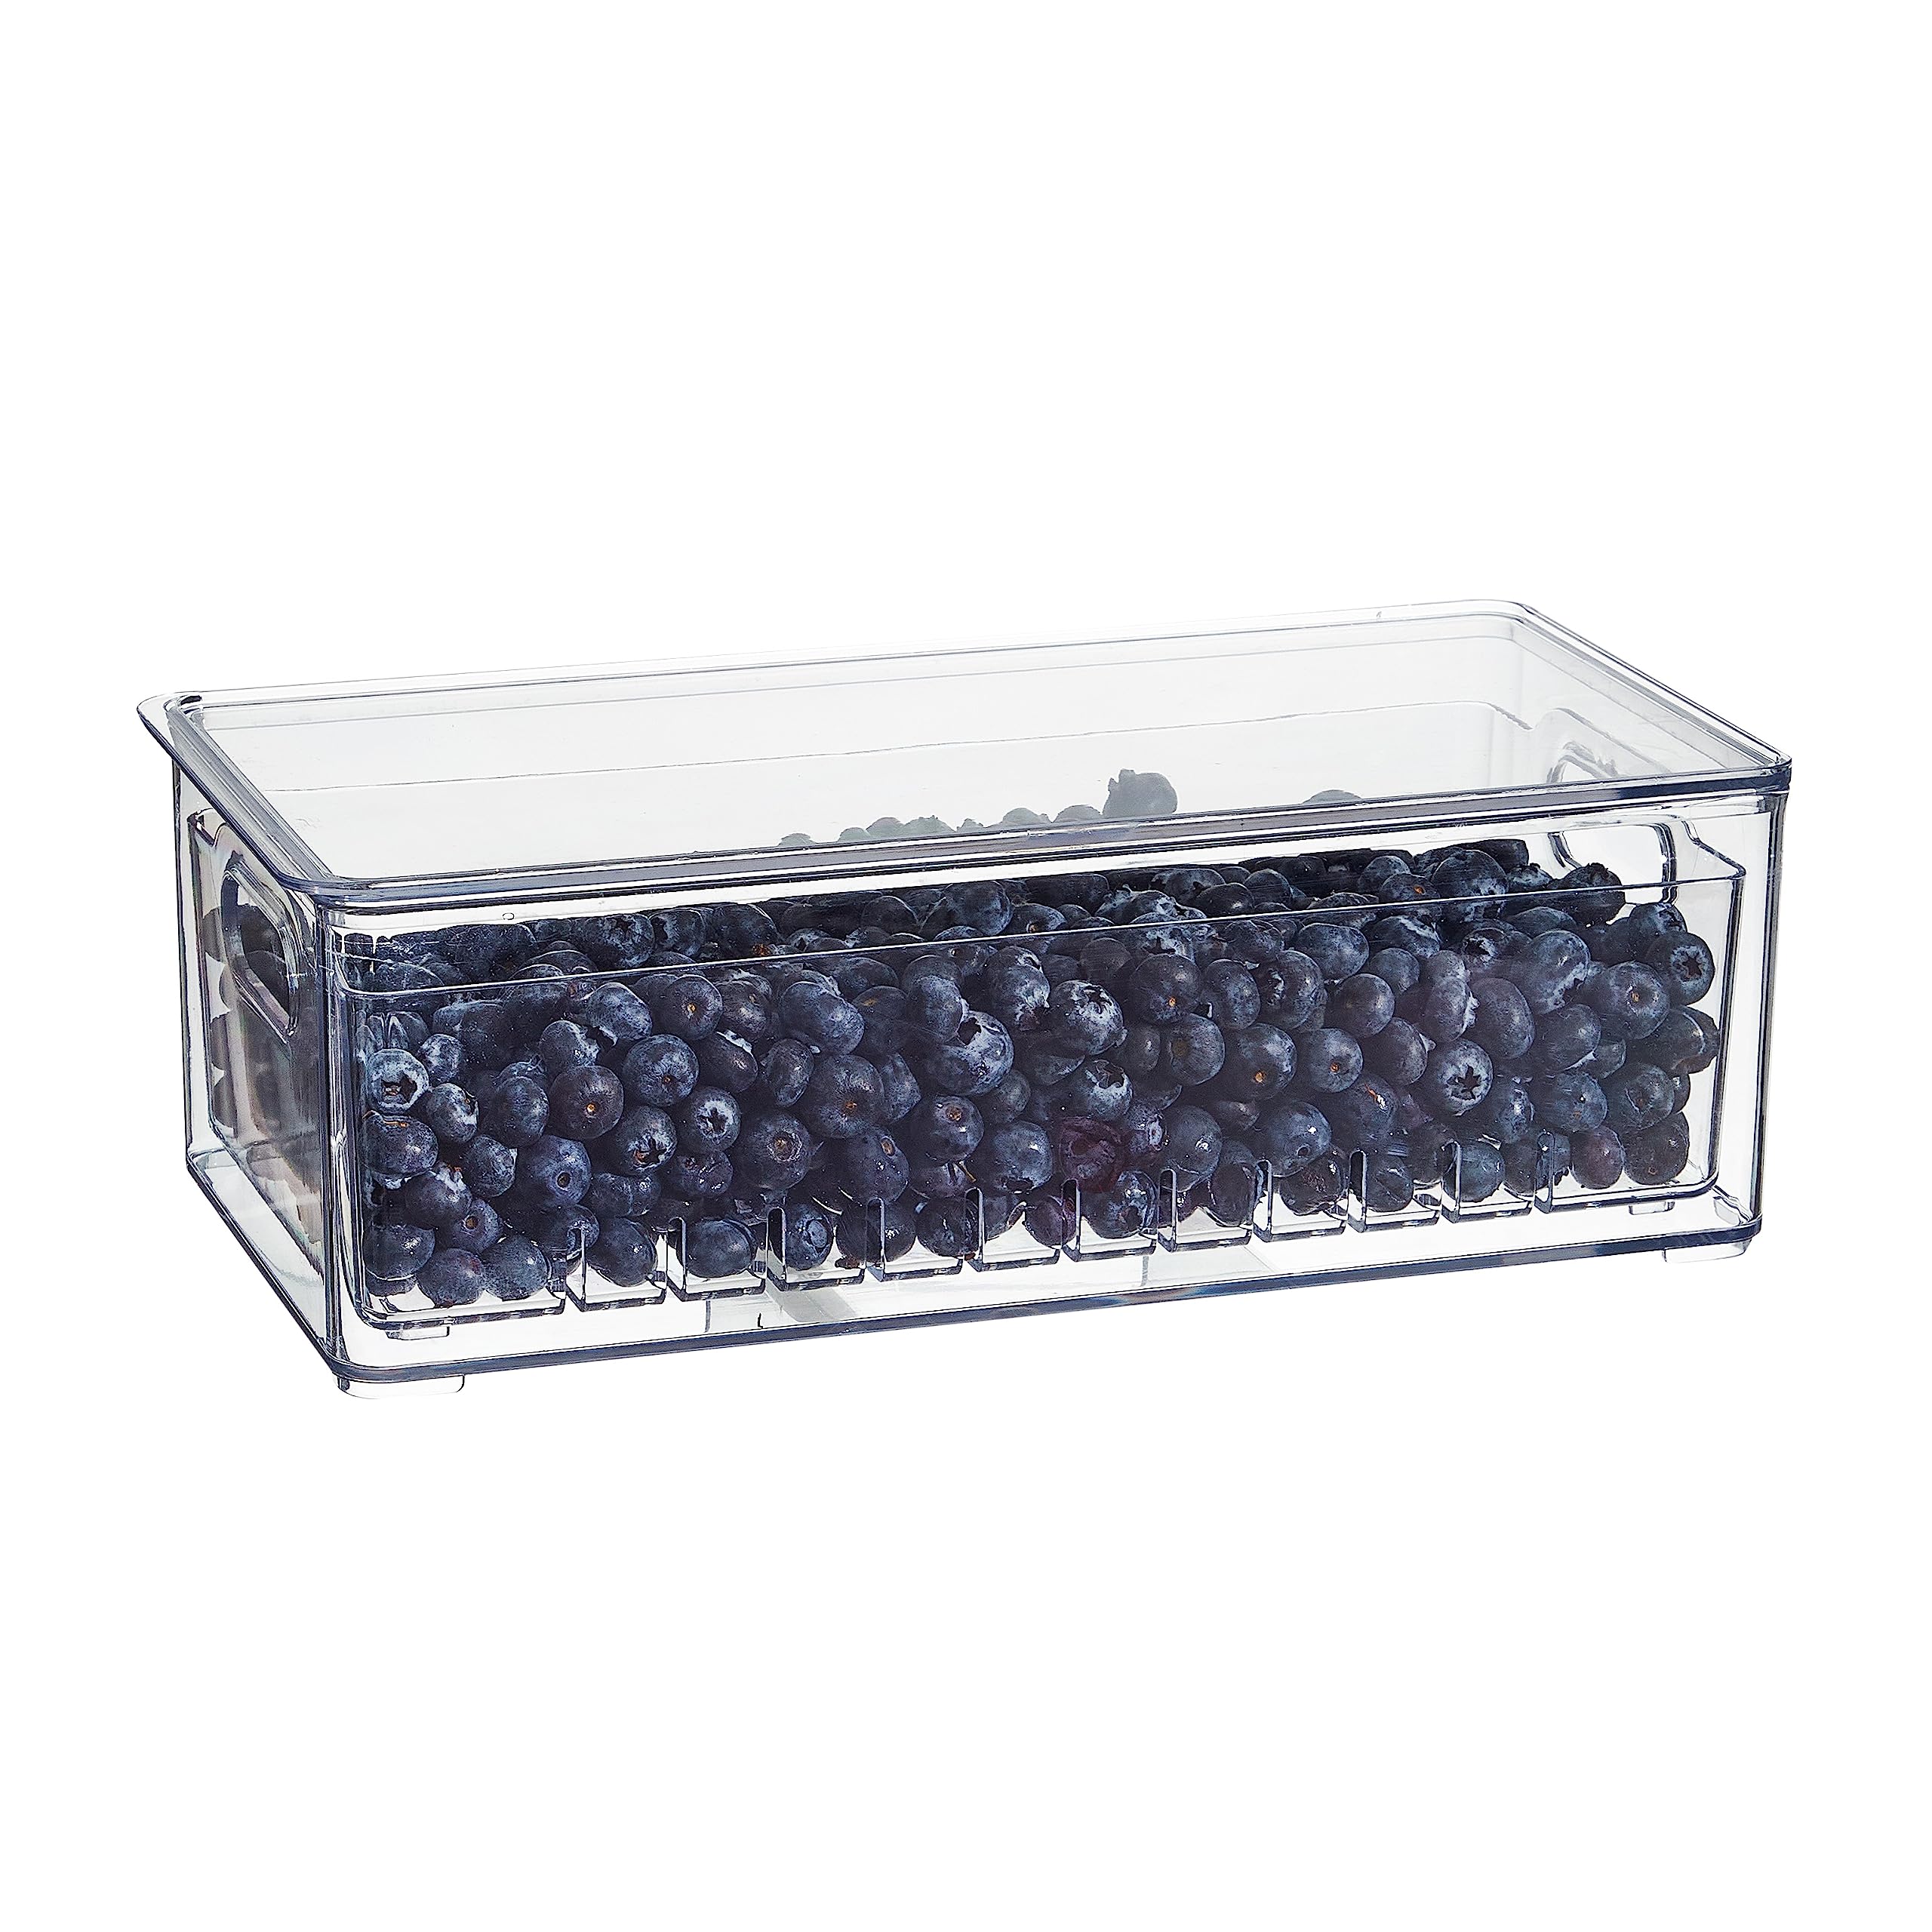 SIMPLEMADE Clear Berry Bins - Berry Keeper Container, Fruit Produce Saver Food Storage Containers with Removable Drain Colanders, Vegetable Fresh Keeper Set - Refrigerator Organizer (Rectangular)  - Very Good